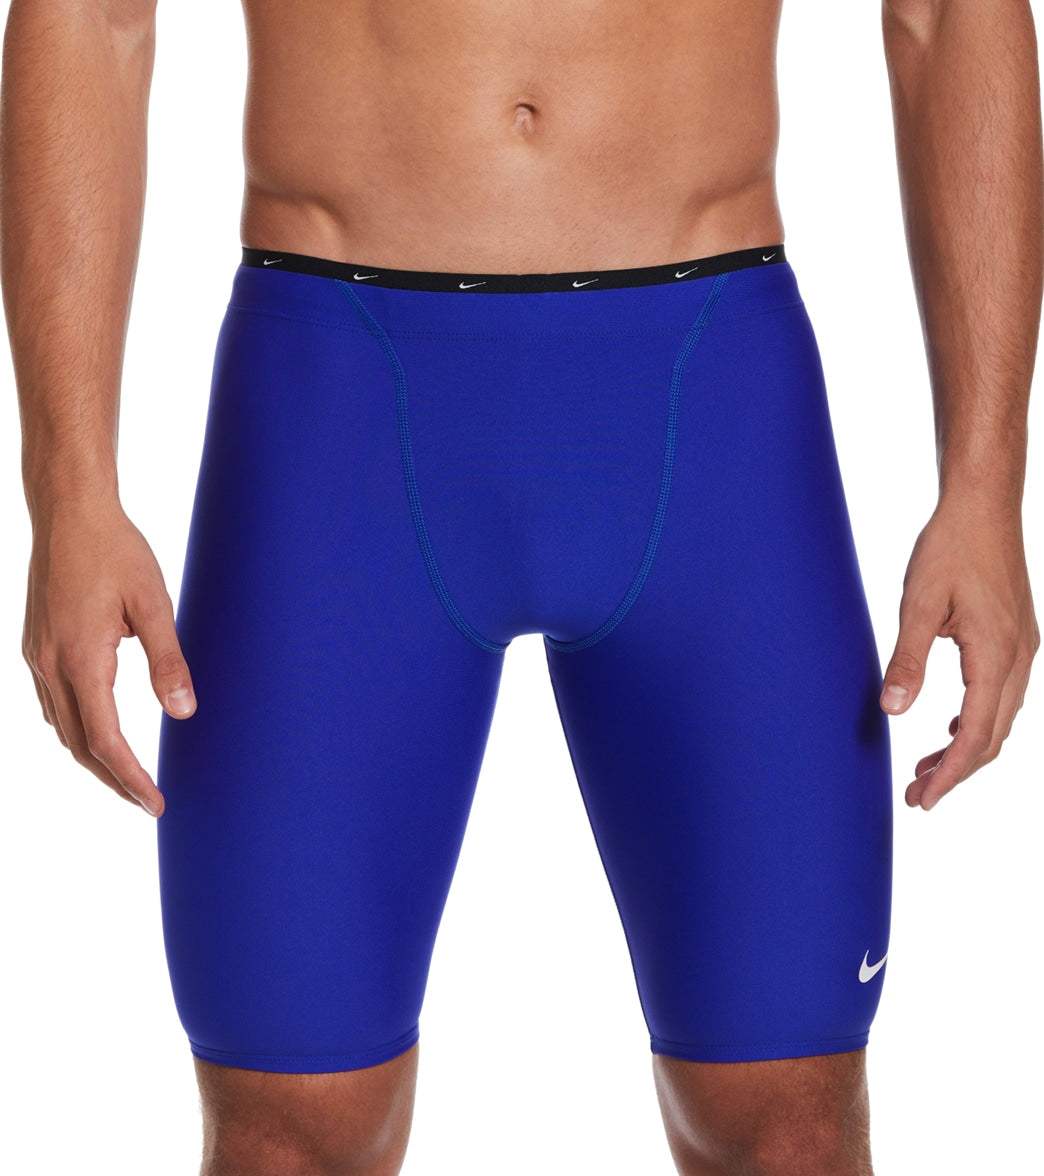 Nike Men's Water Reveal Jammer Swimsuit at SwimOutlet.com